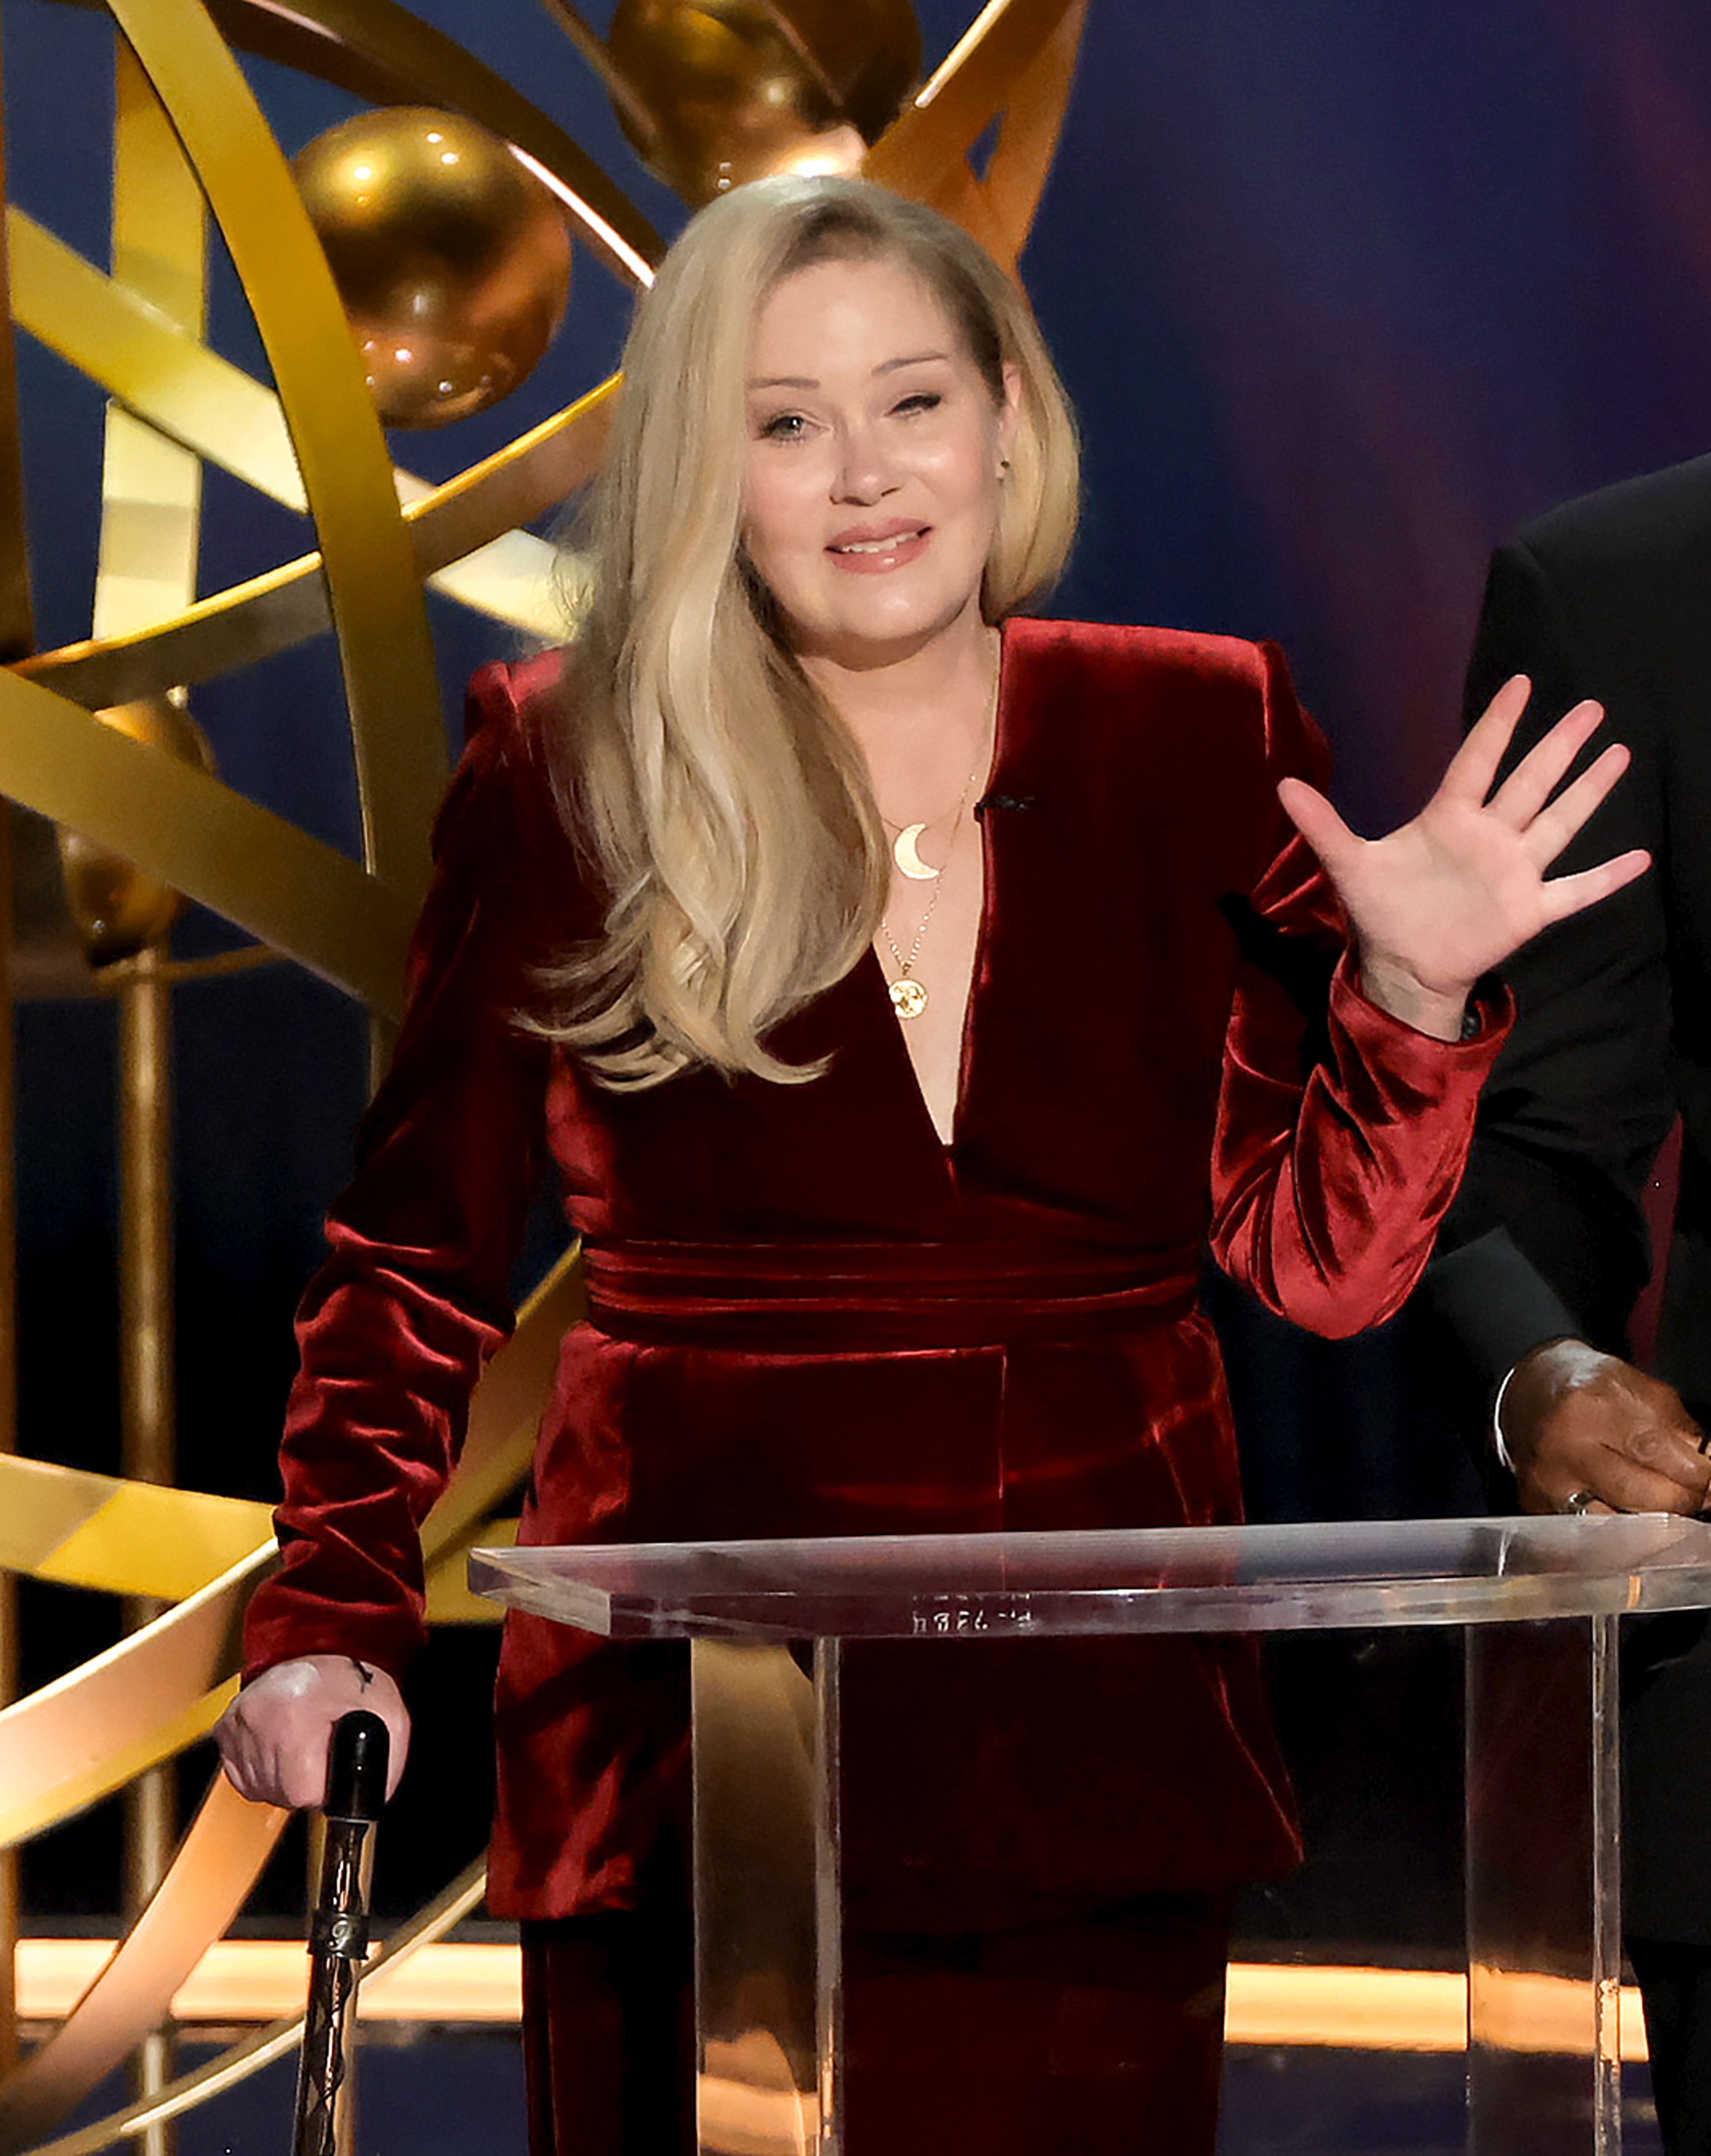 Christina Applegate speaking at a podium, wearing a velvet suit, waving to the audience